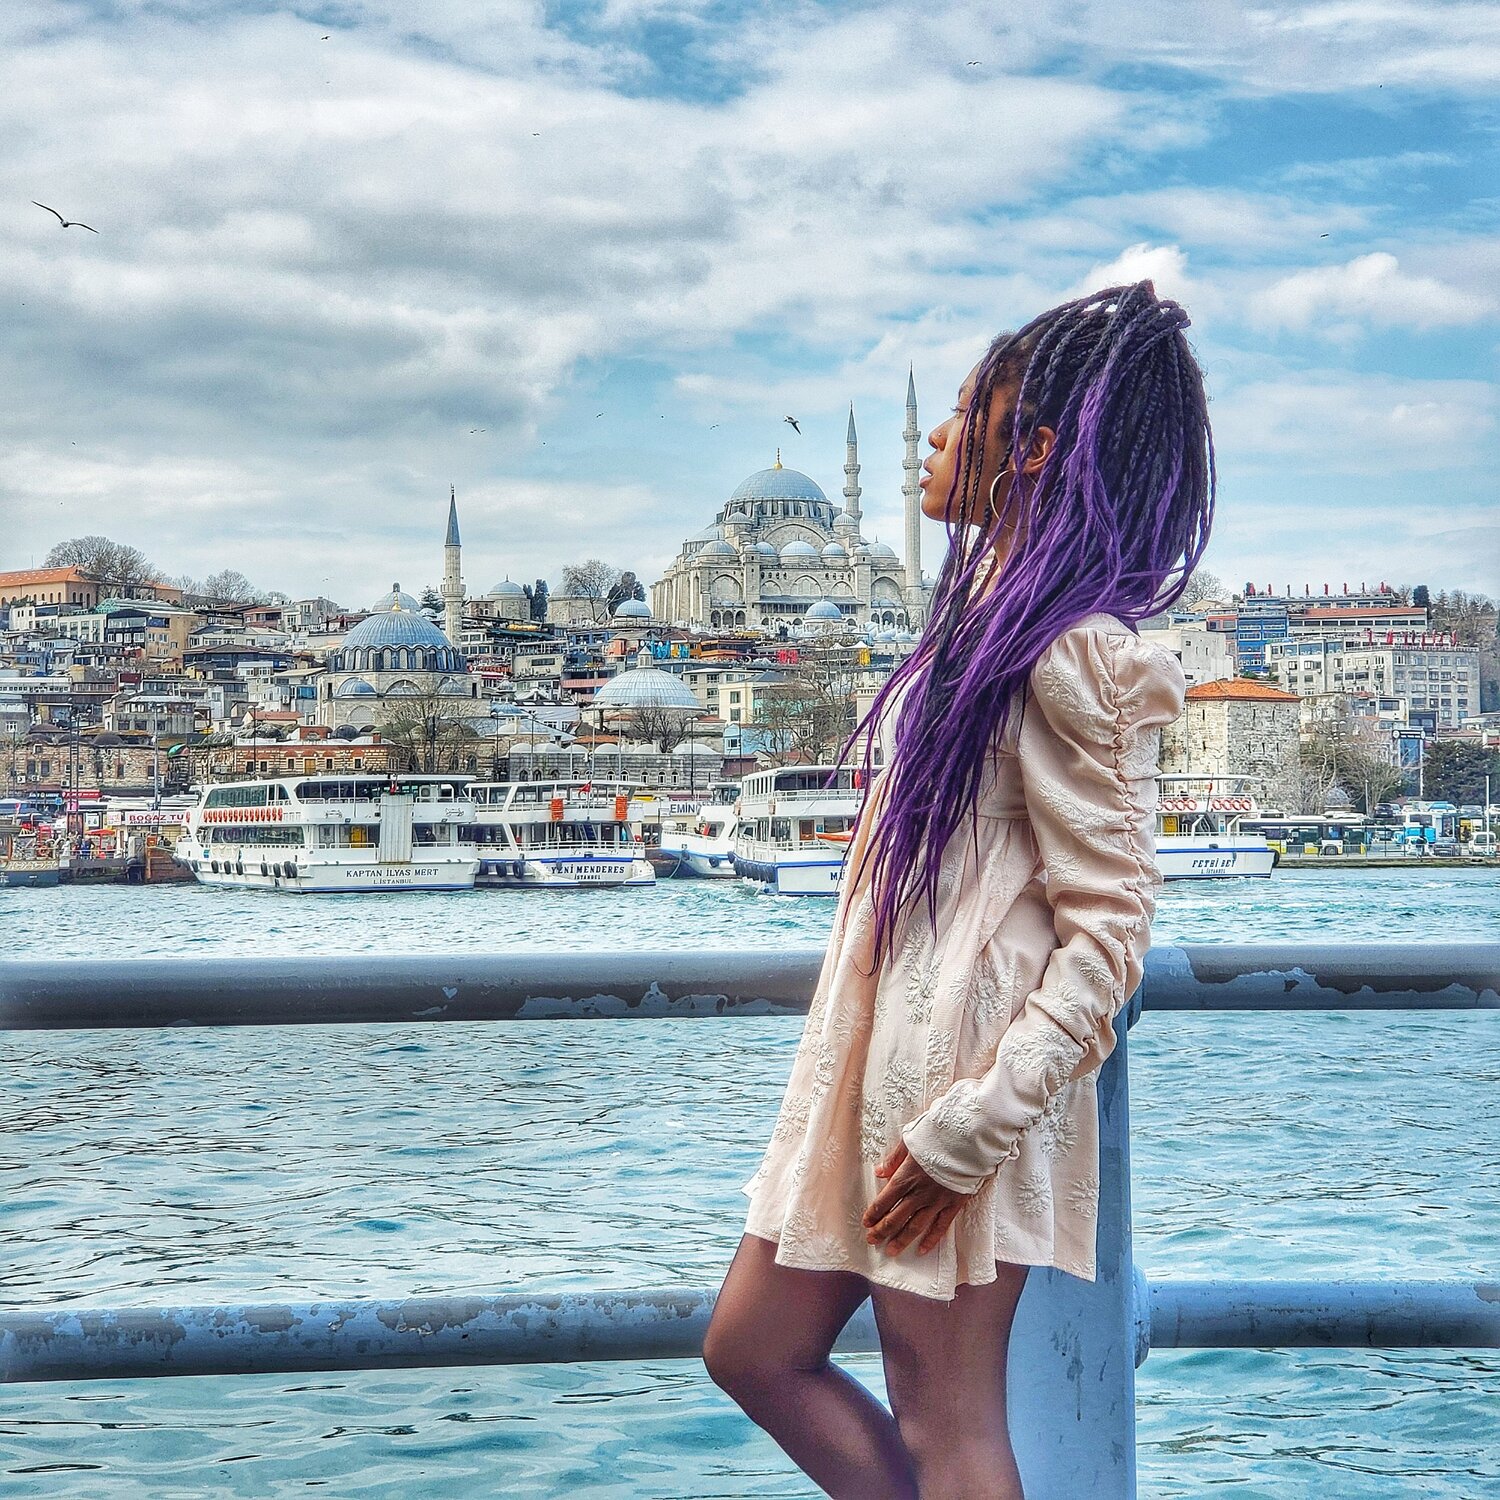 Fortress from Ottoman, Byzantine eras to become Istanbul's most glamorous  cultural venue